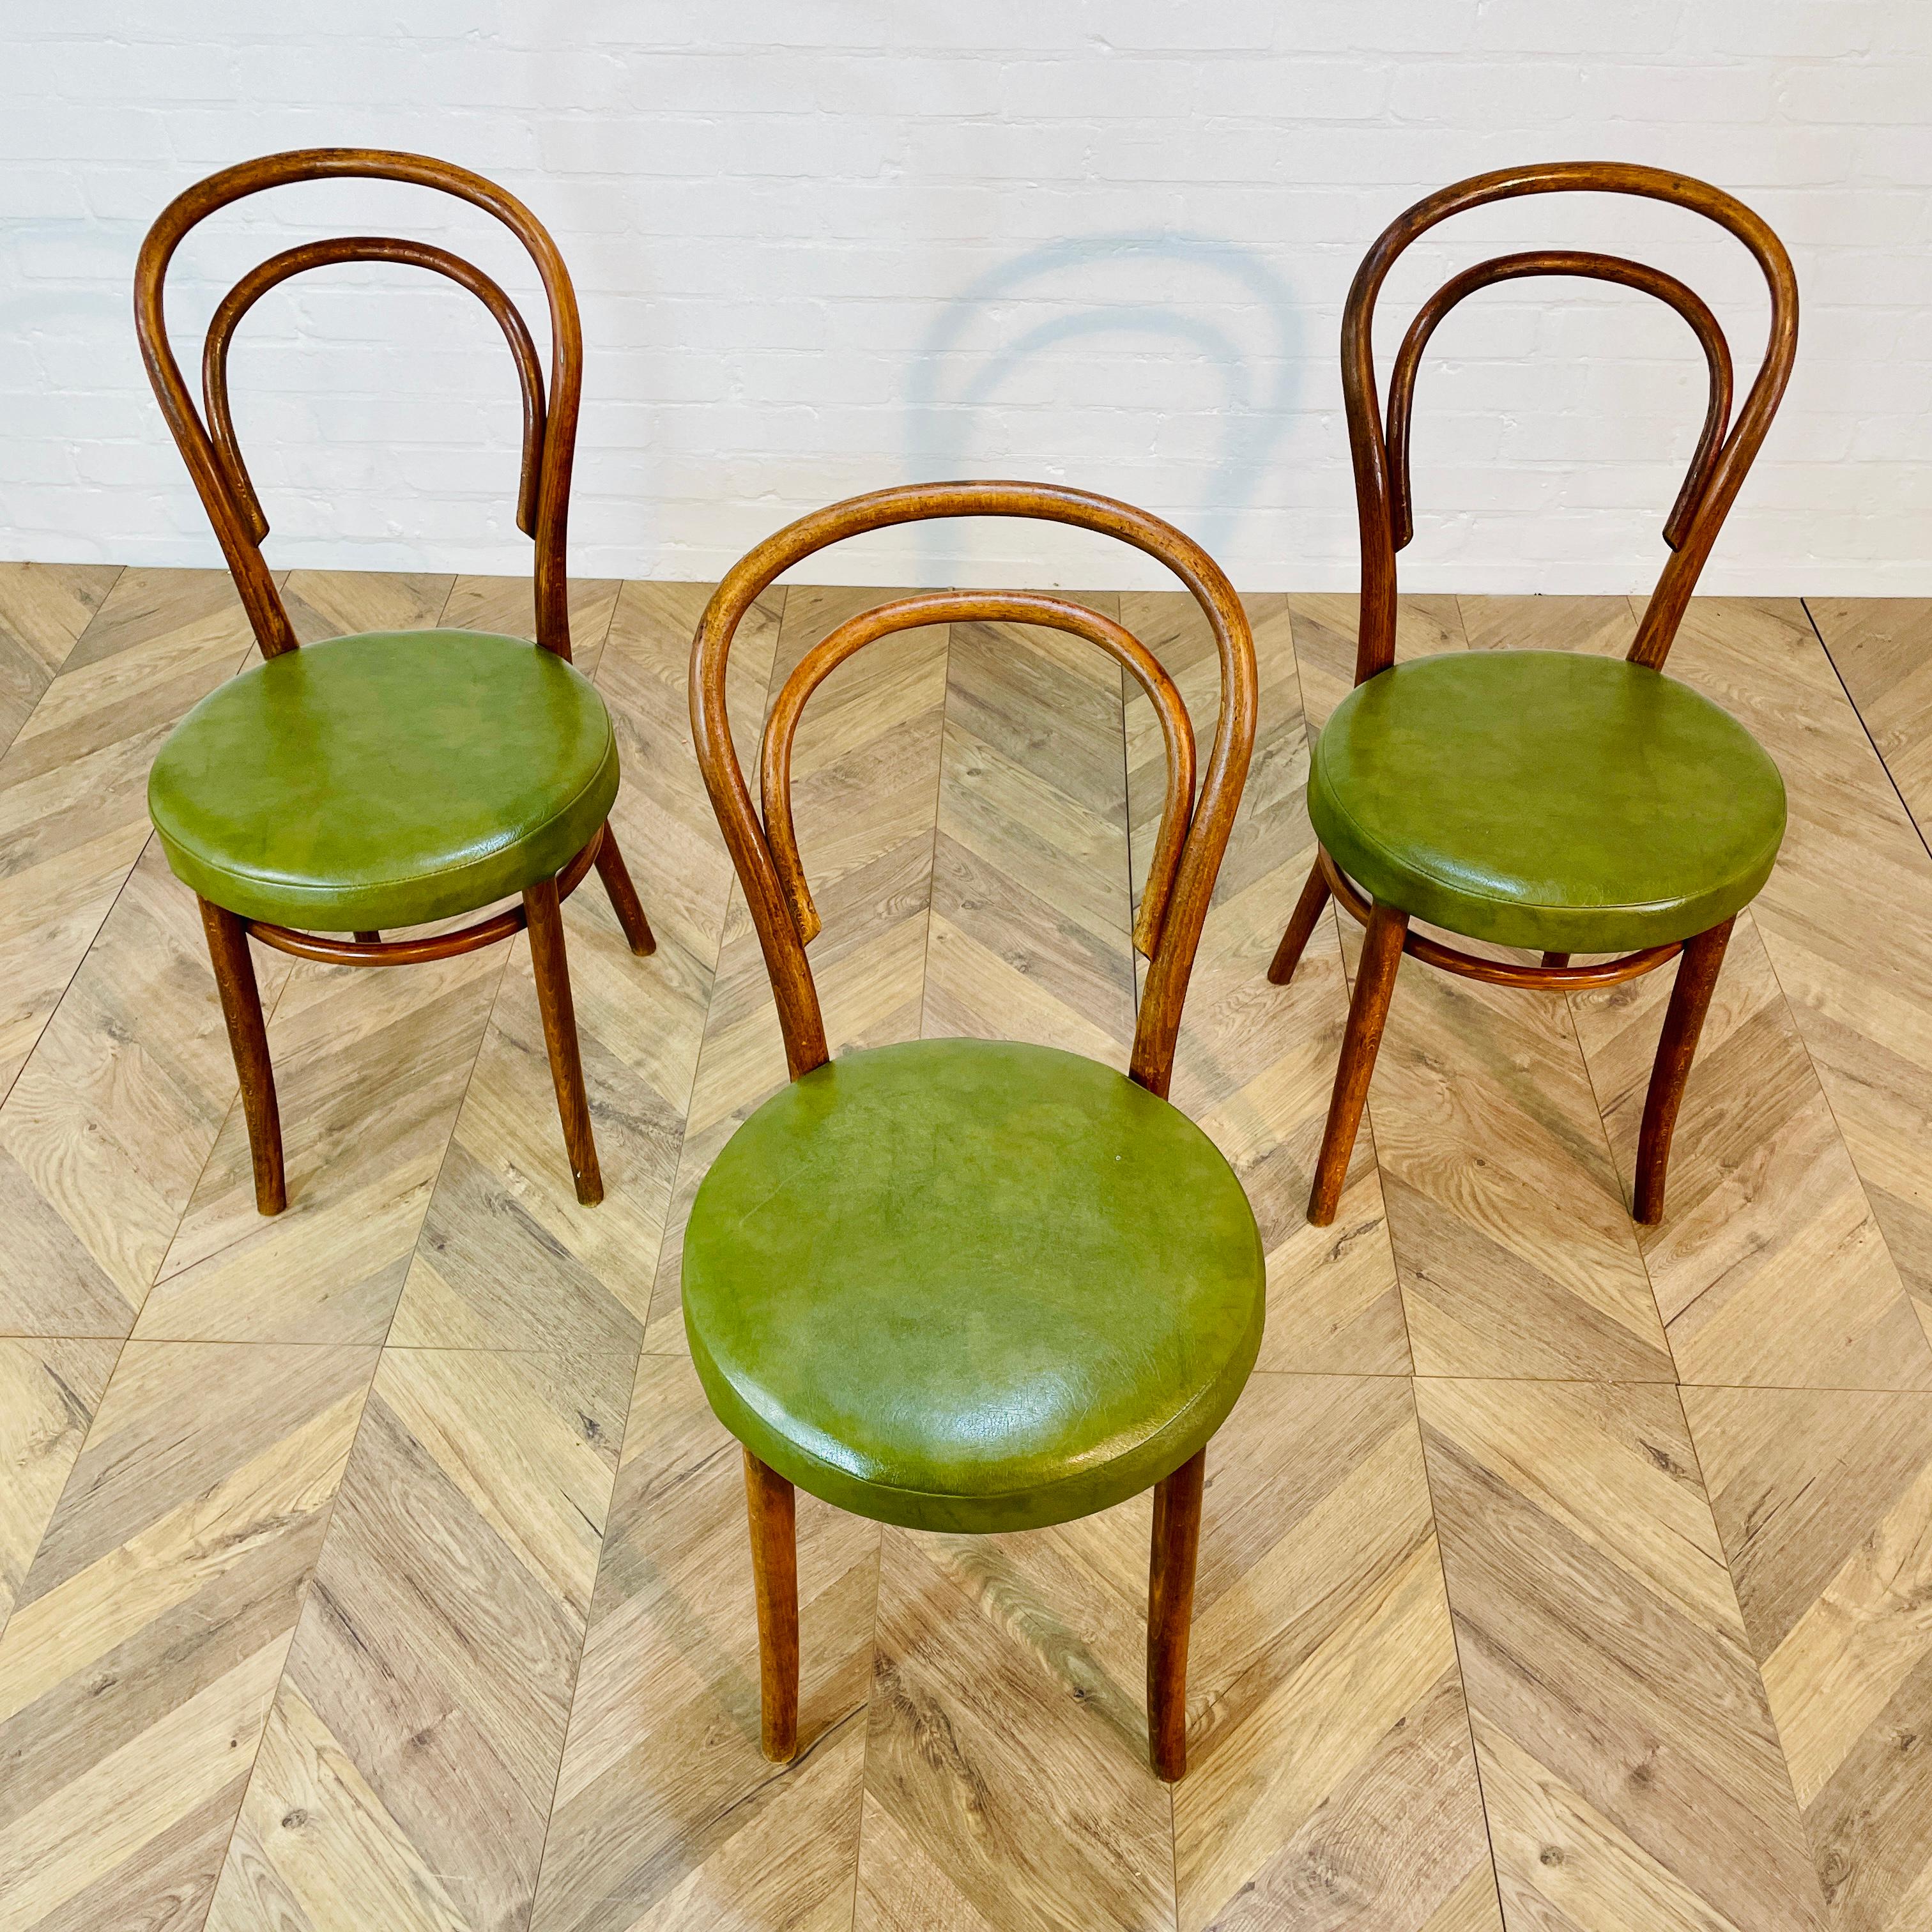 Set of 3 of Vintage Mid-Century ZPM Radomsko Bentwood Chairs, circa 1950s.

The chairs made by Polish furniture maker Radomsko ZMG, famed for also making Thonet chairs (same factory) are in a good vintage condition with only small marks and scuffs